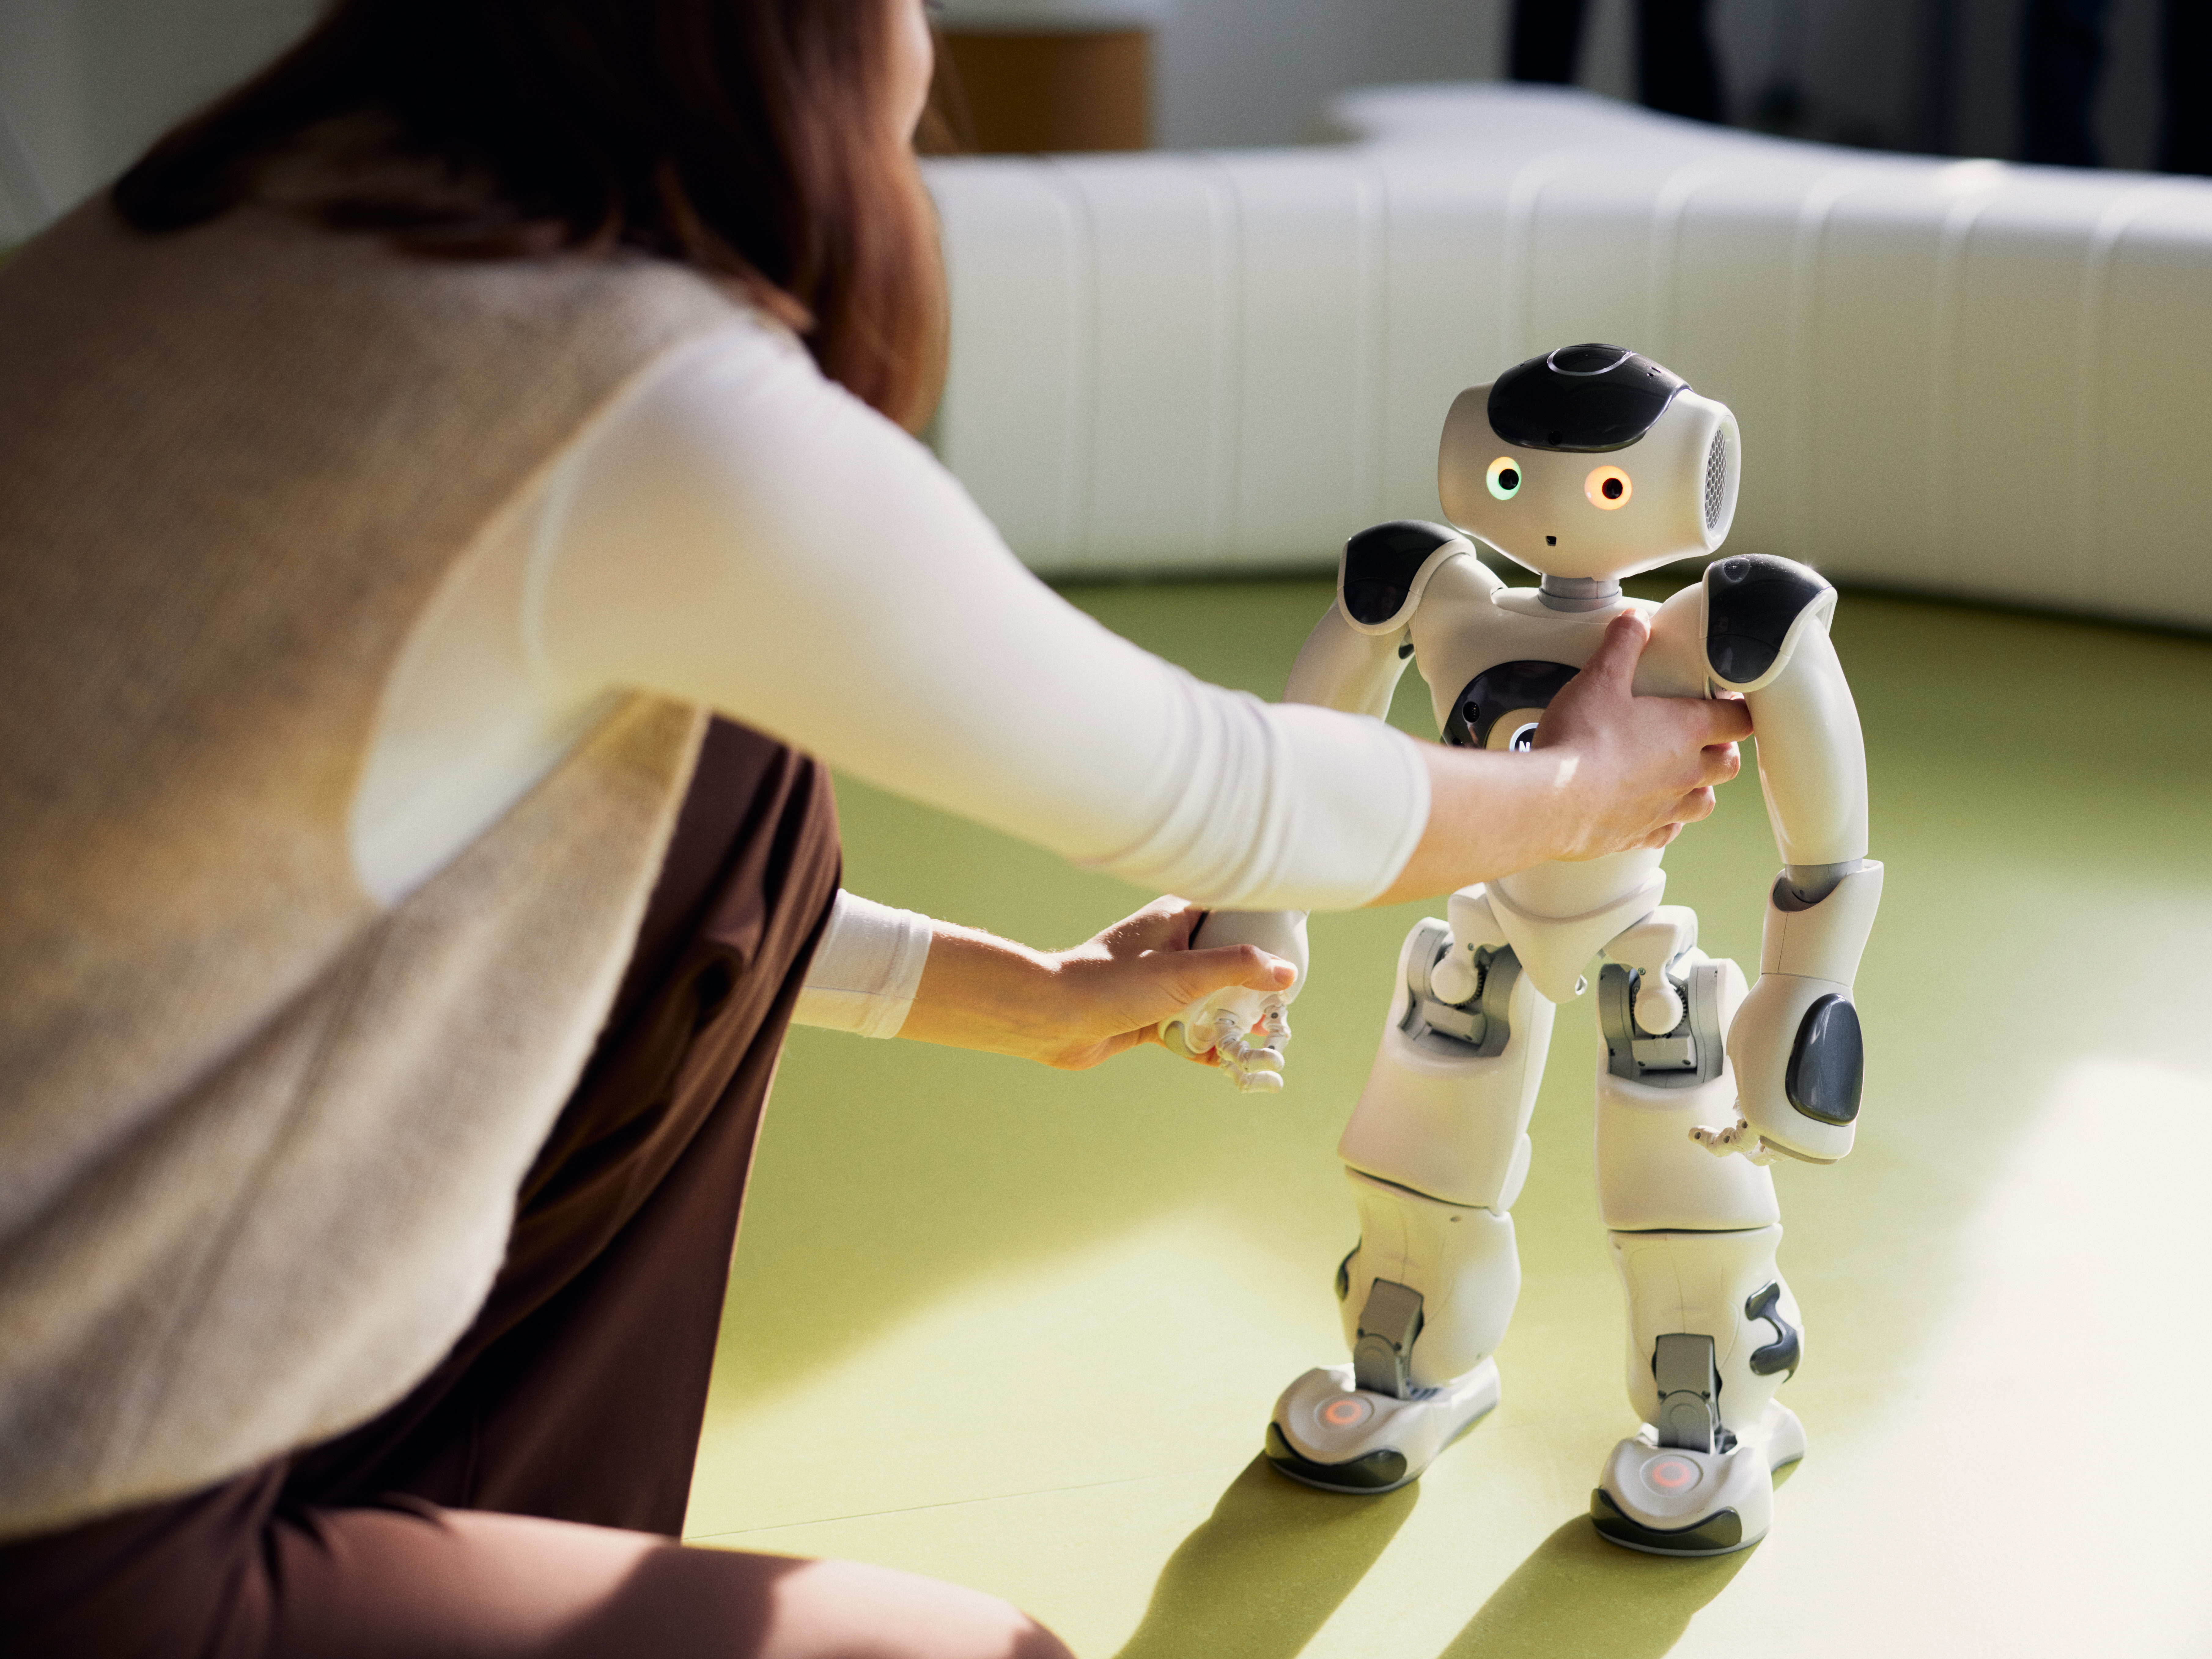 Researcher is working with NAO